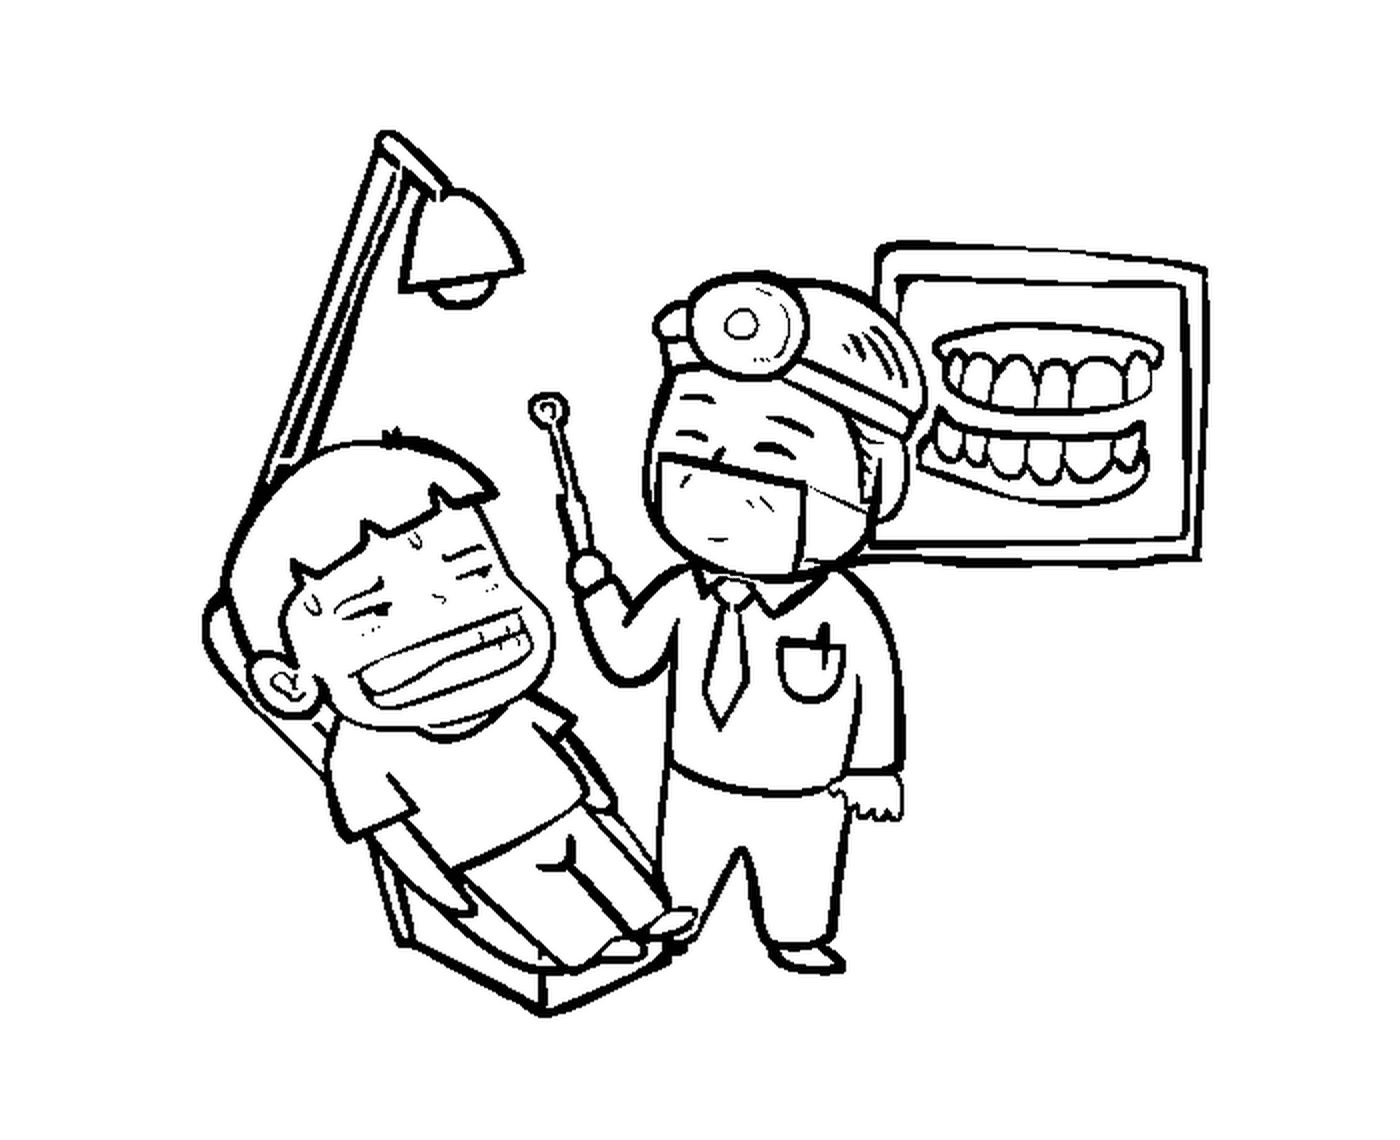  A child at the dentist's 